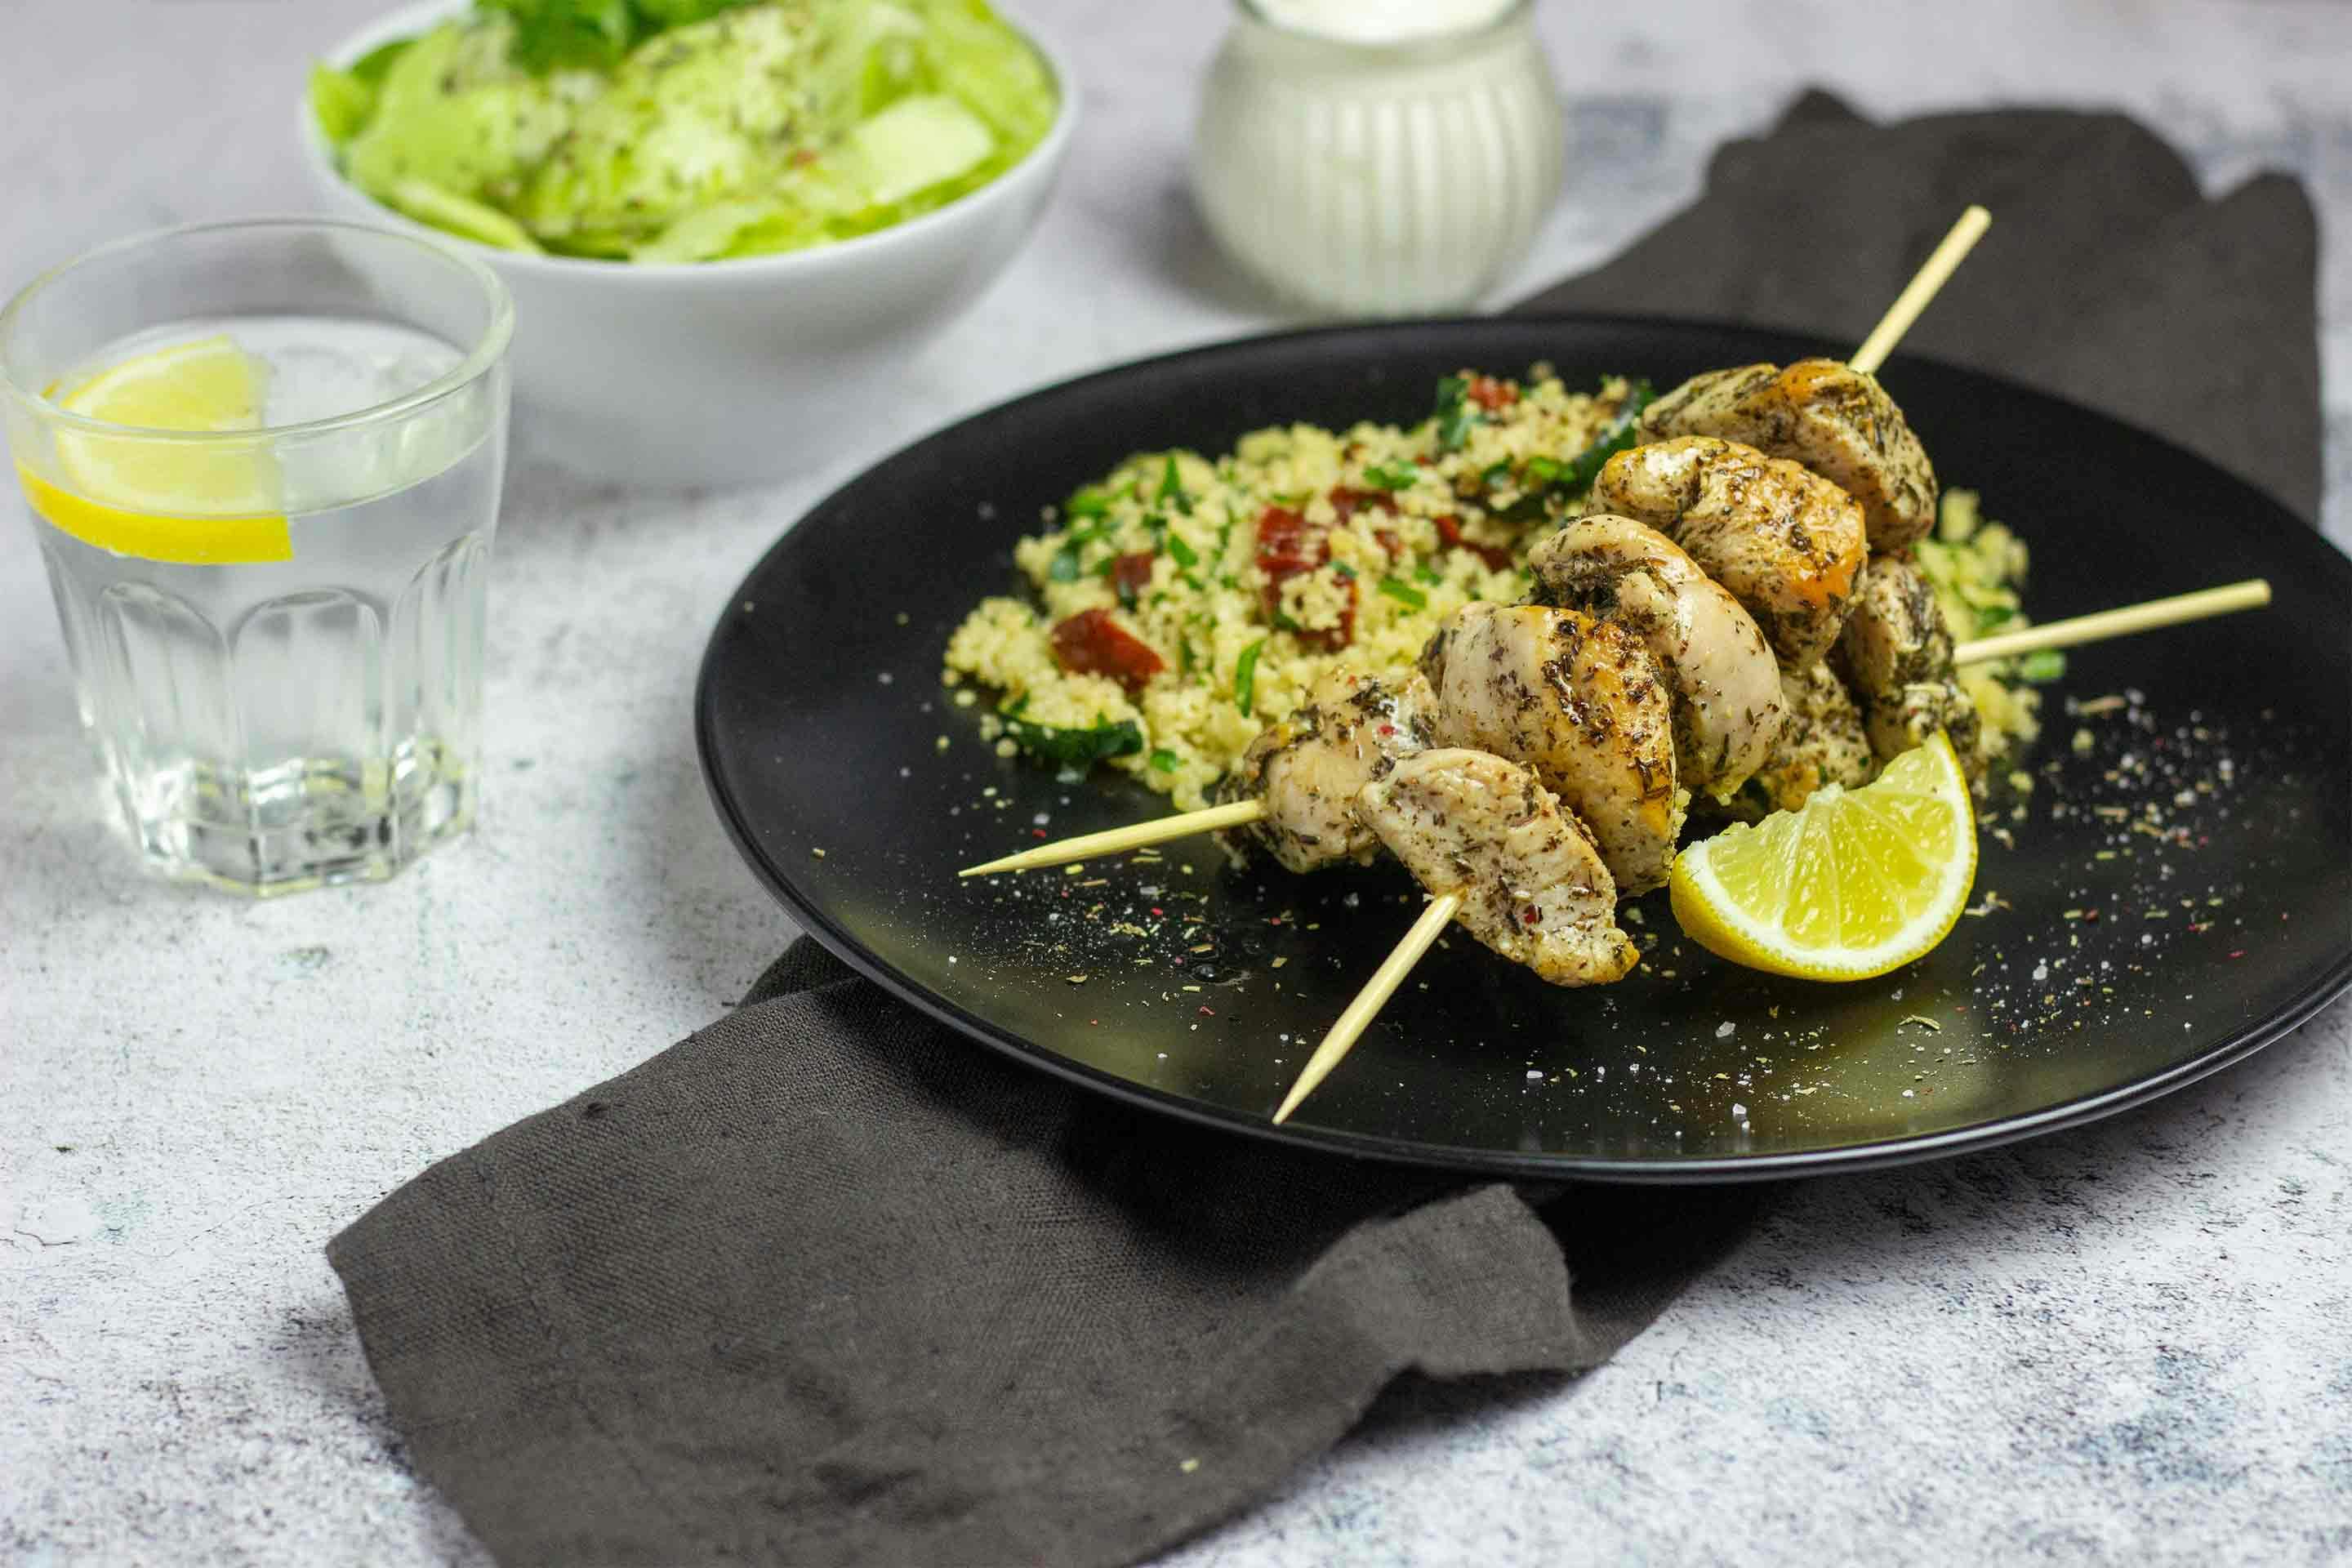 Delicious chicken skewers with Mediterranean couscous bring holiday vibes into the kitchen.